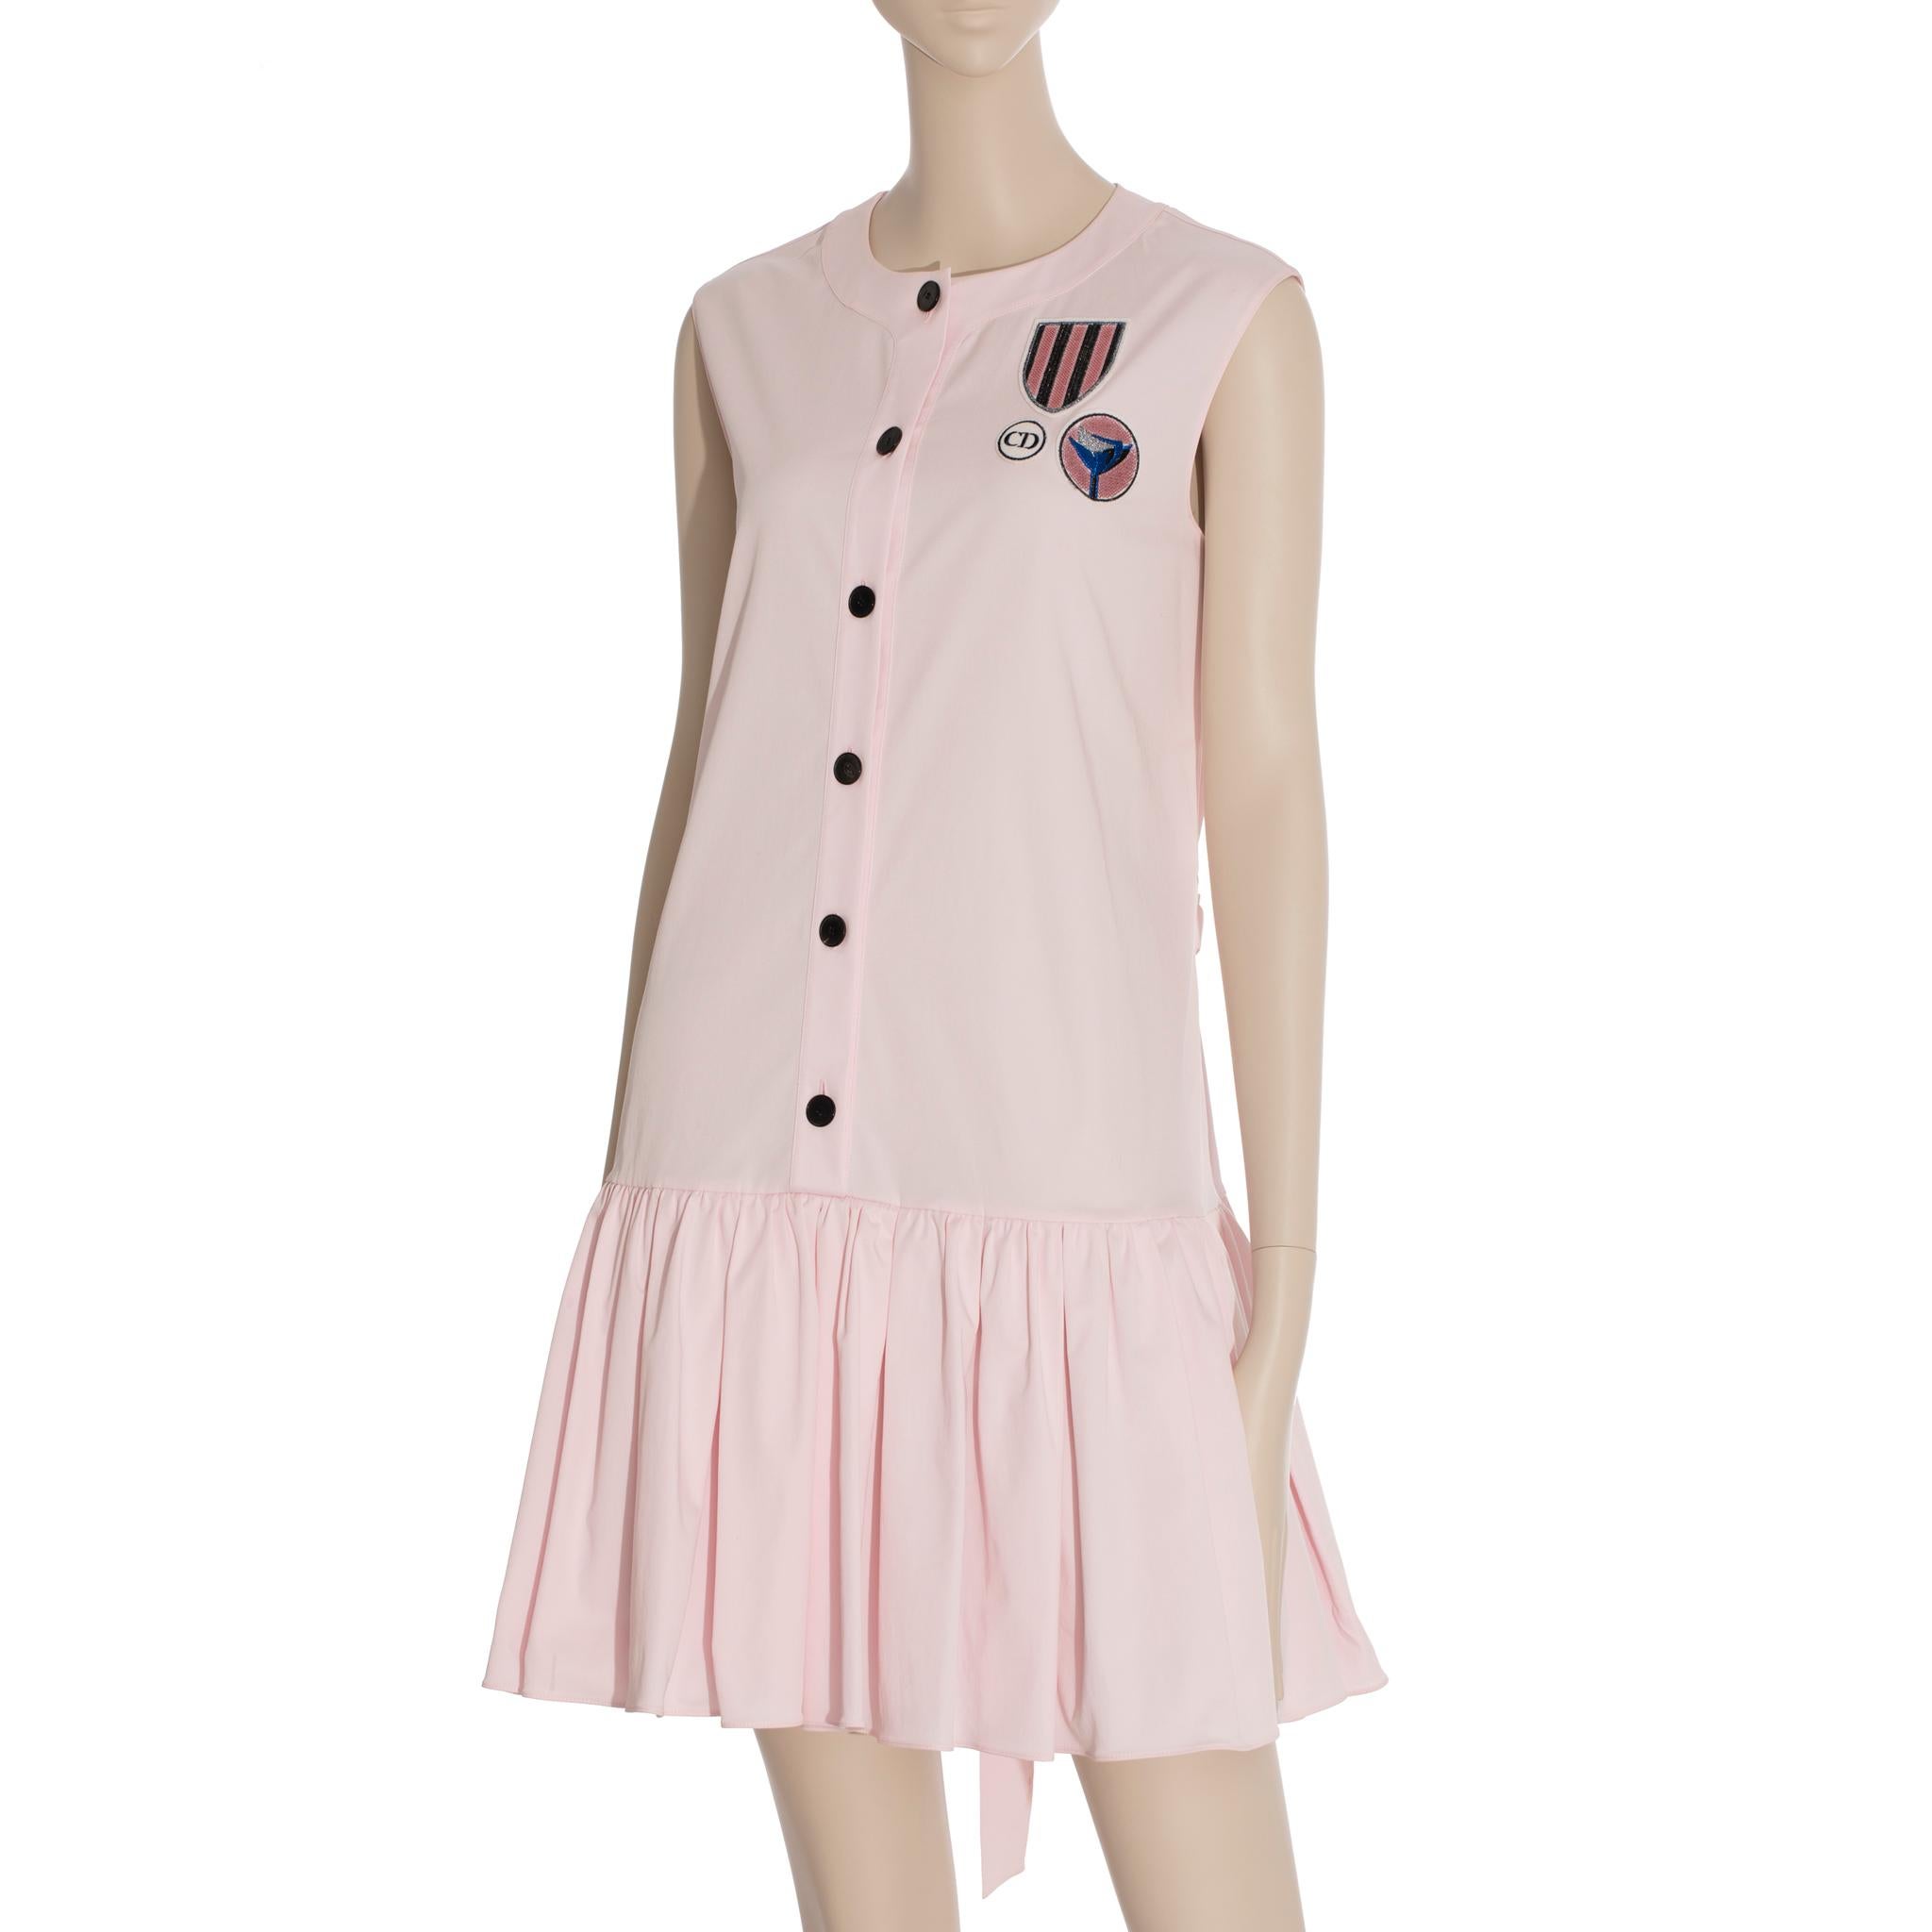 Christian Dior Pink Dress Size 42 FR In Excellent Condition For Sale In DOUBLE BAY, NSW